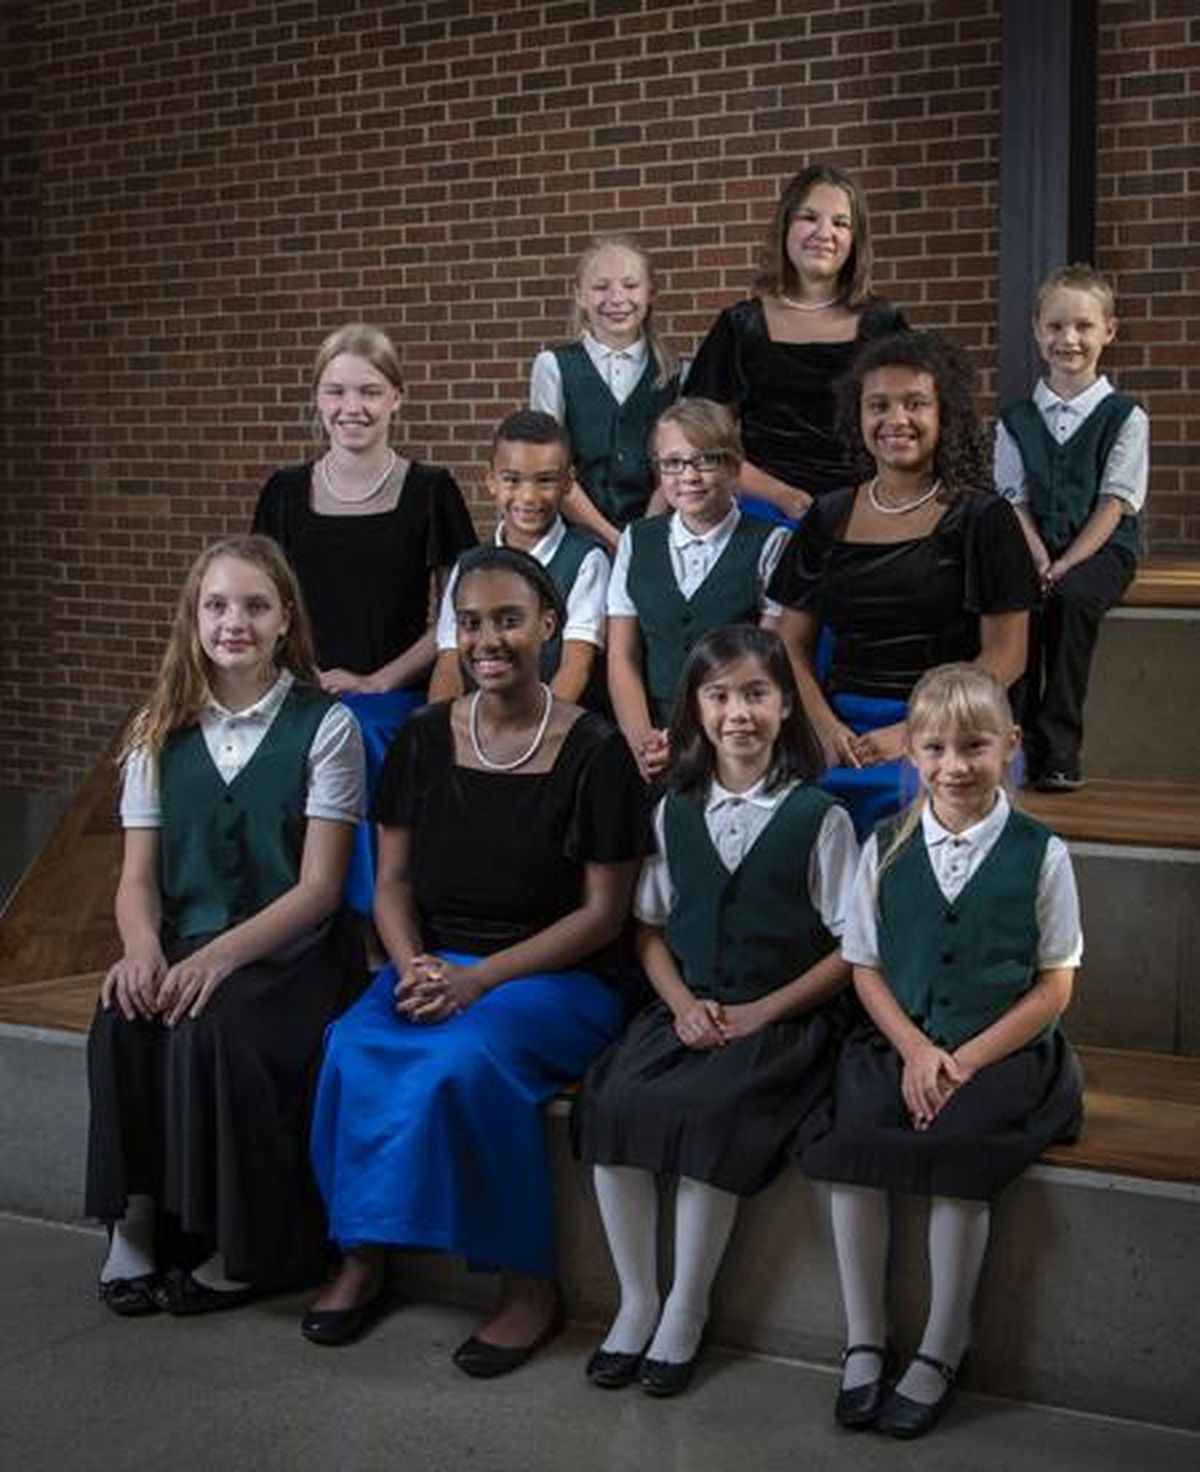 Members of the Spokane Area Youth Choirs will perform today at the KPBX Kids’ Concert. (Courtesy)